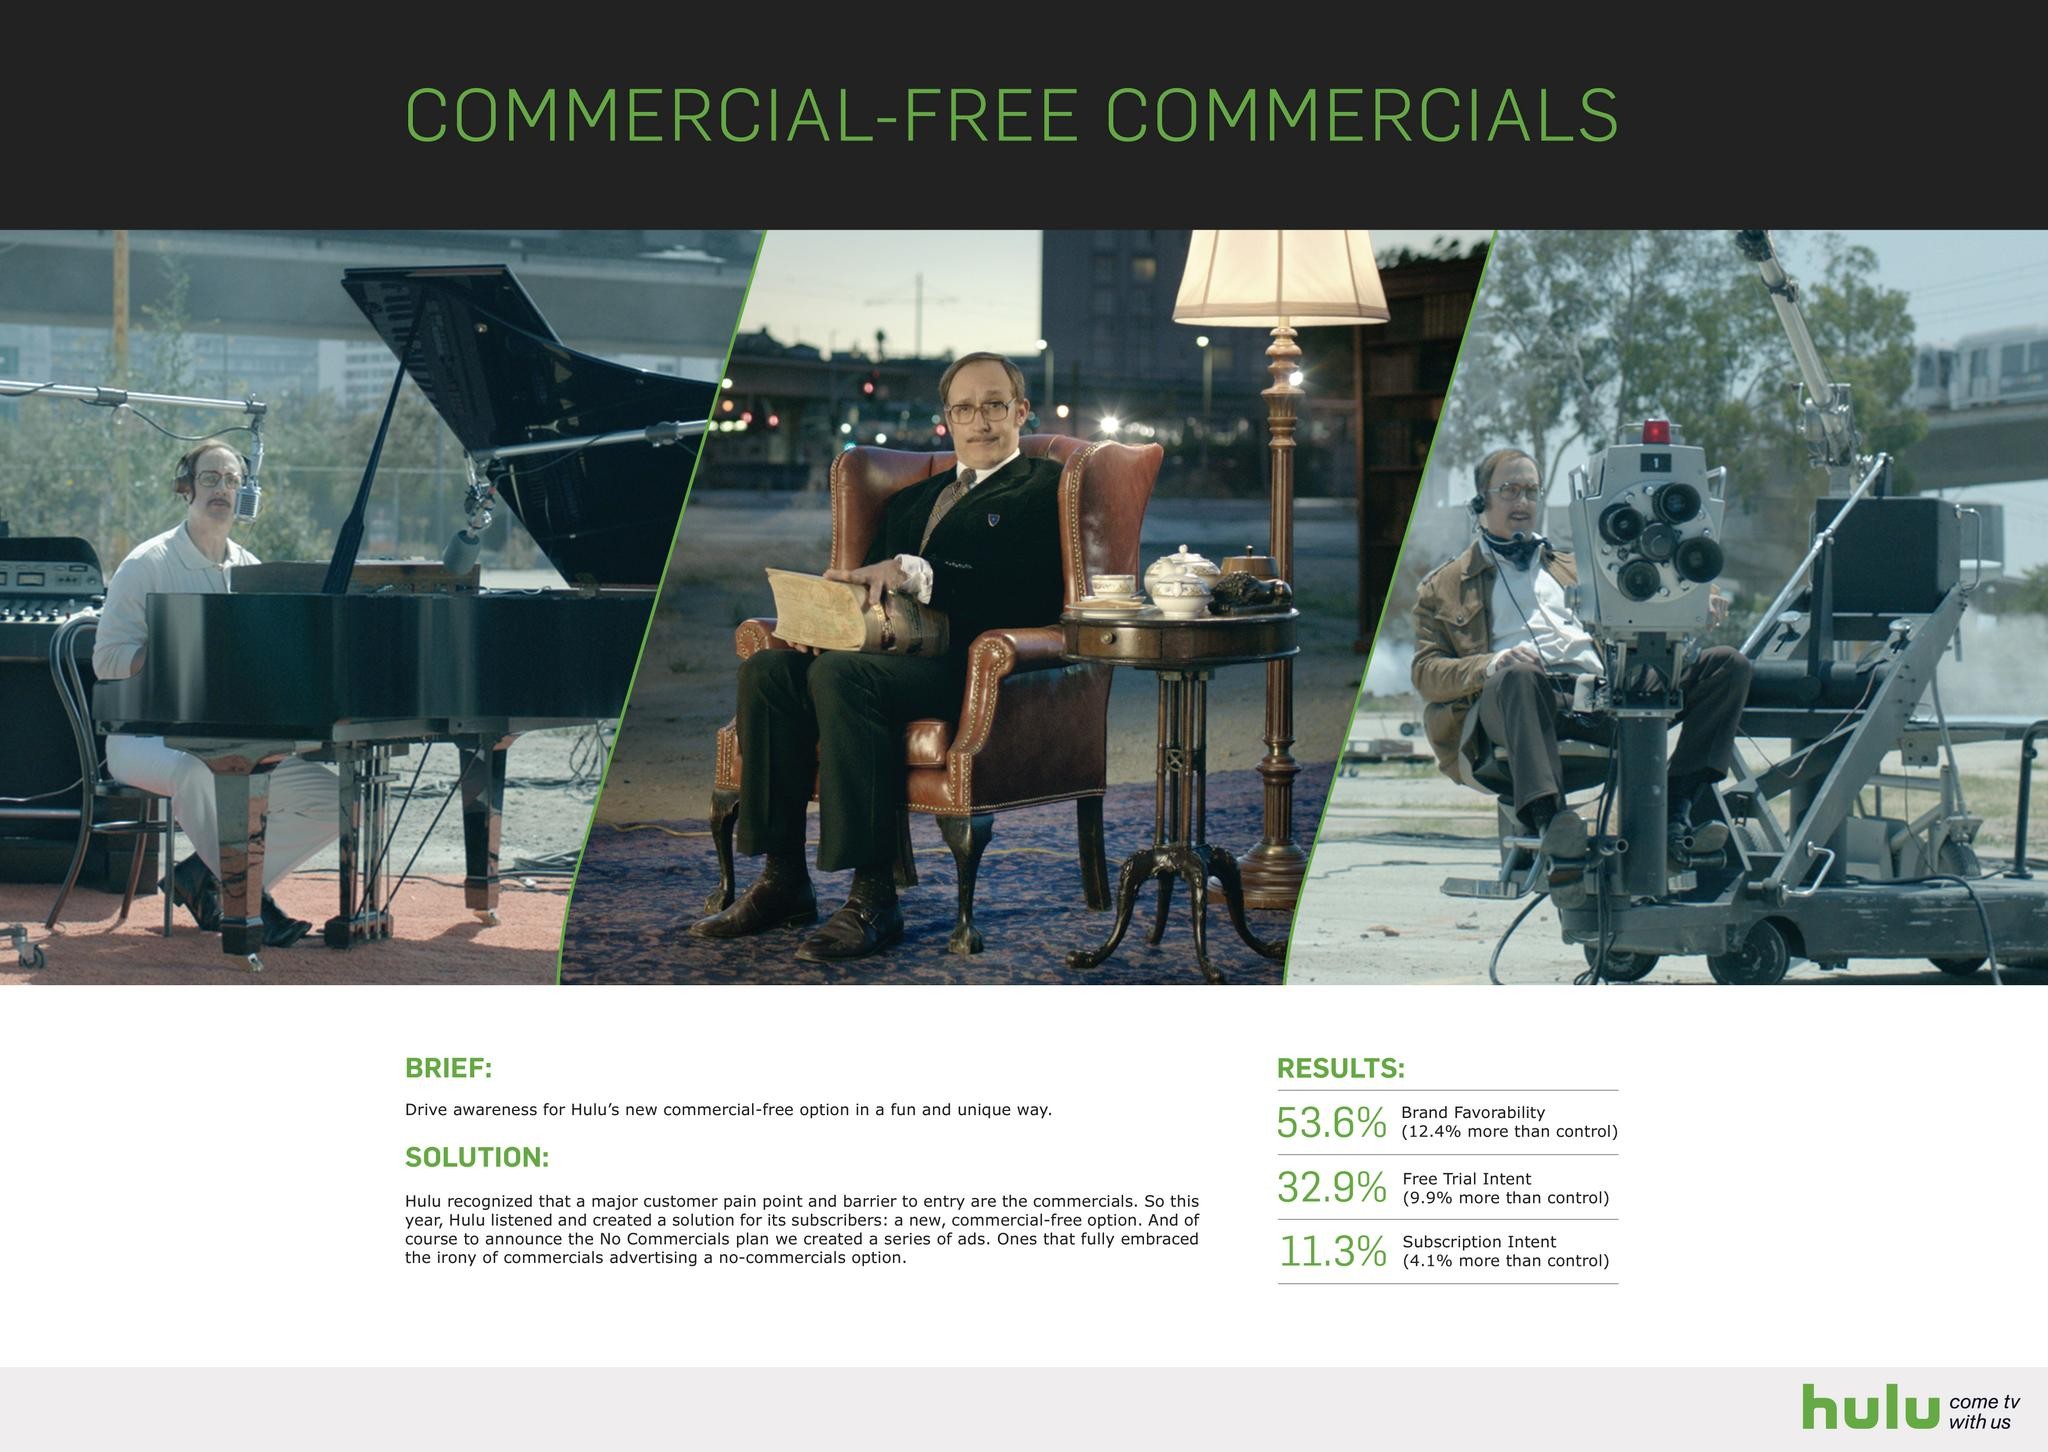 HULU "COMMERCIAL-FREE COMMERCIALS"